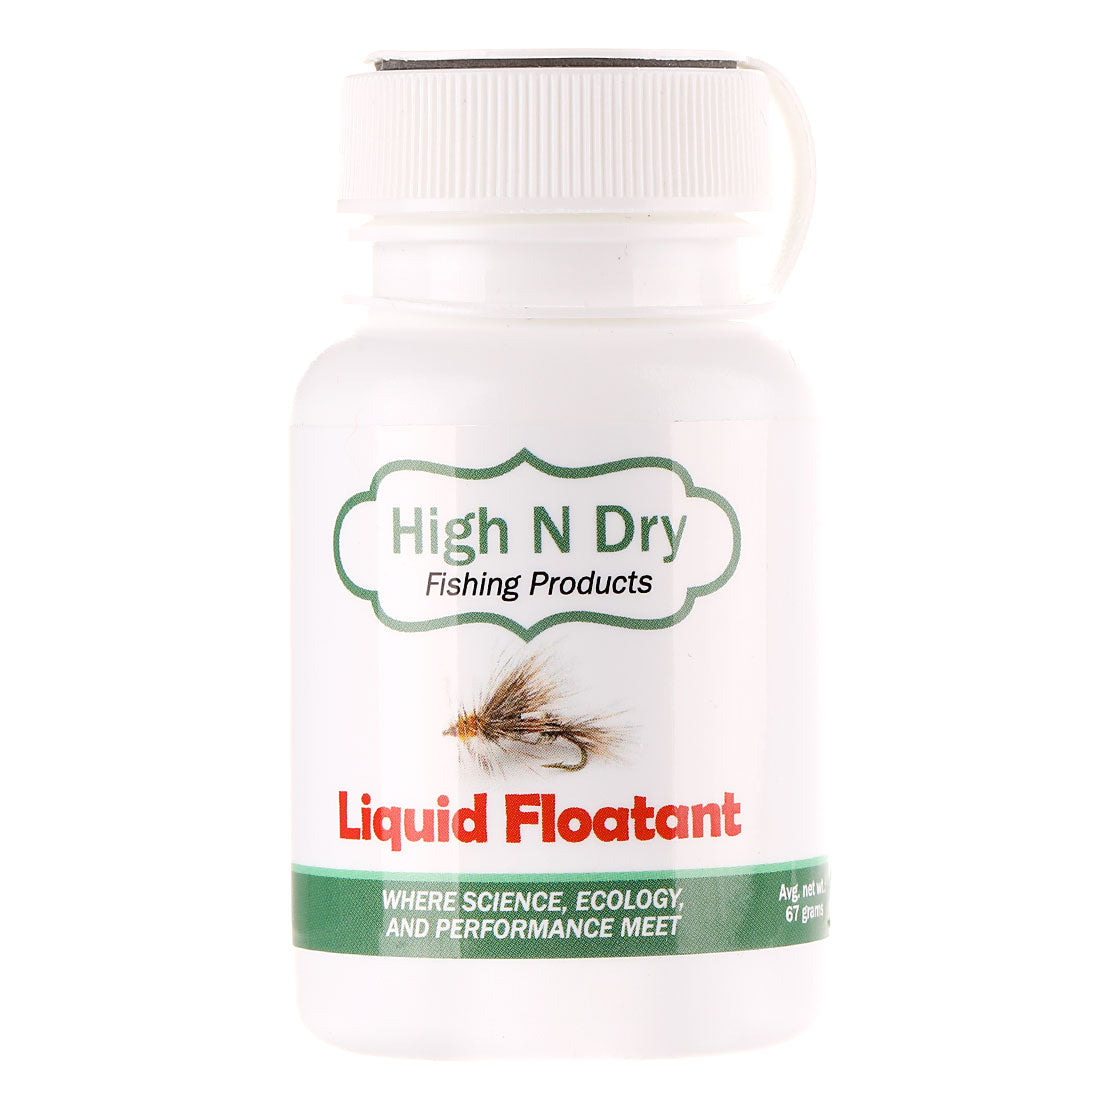 HIGH N DRY Powdered Floatant with Brush